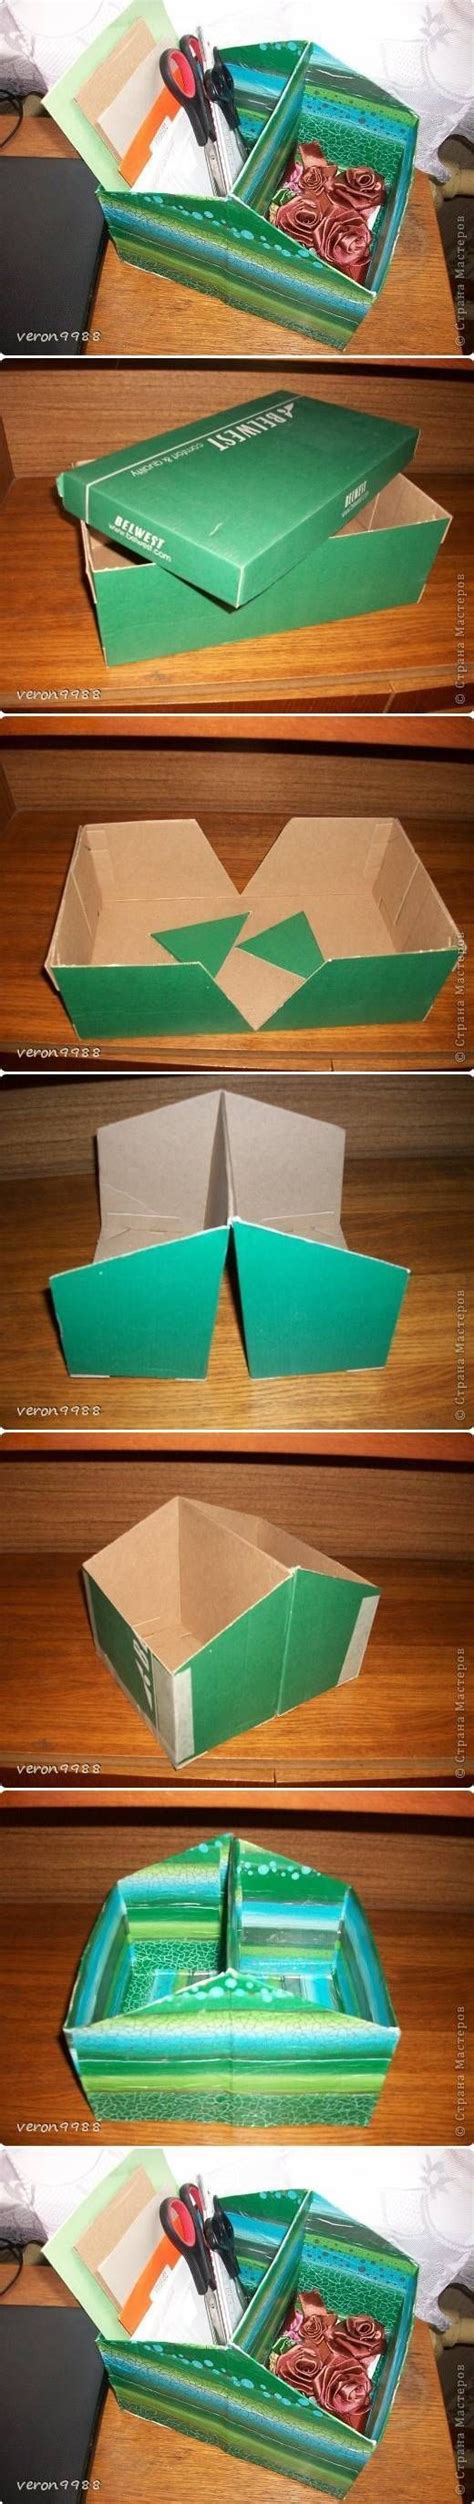 Diy Shoe Box Organizer Pictures Photos And Images For Facebook